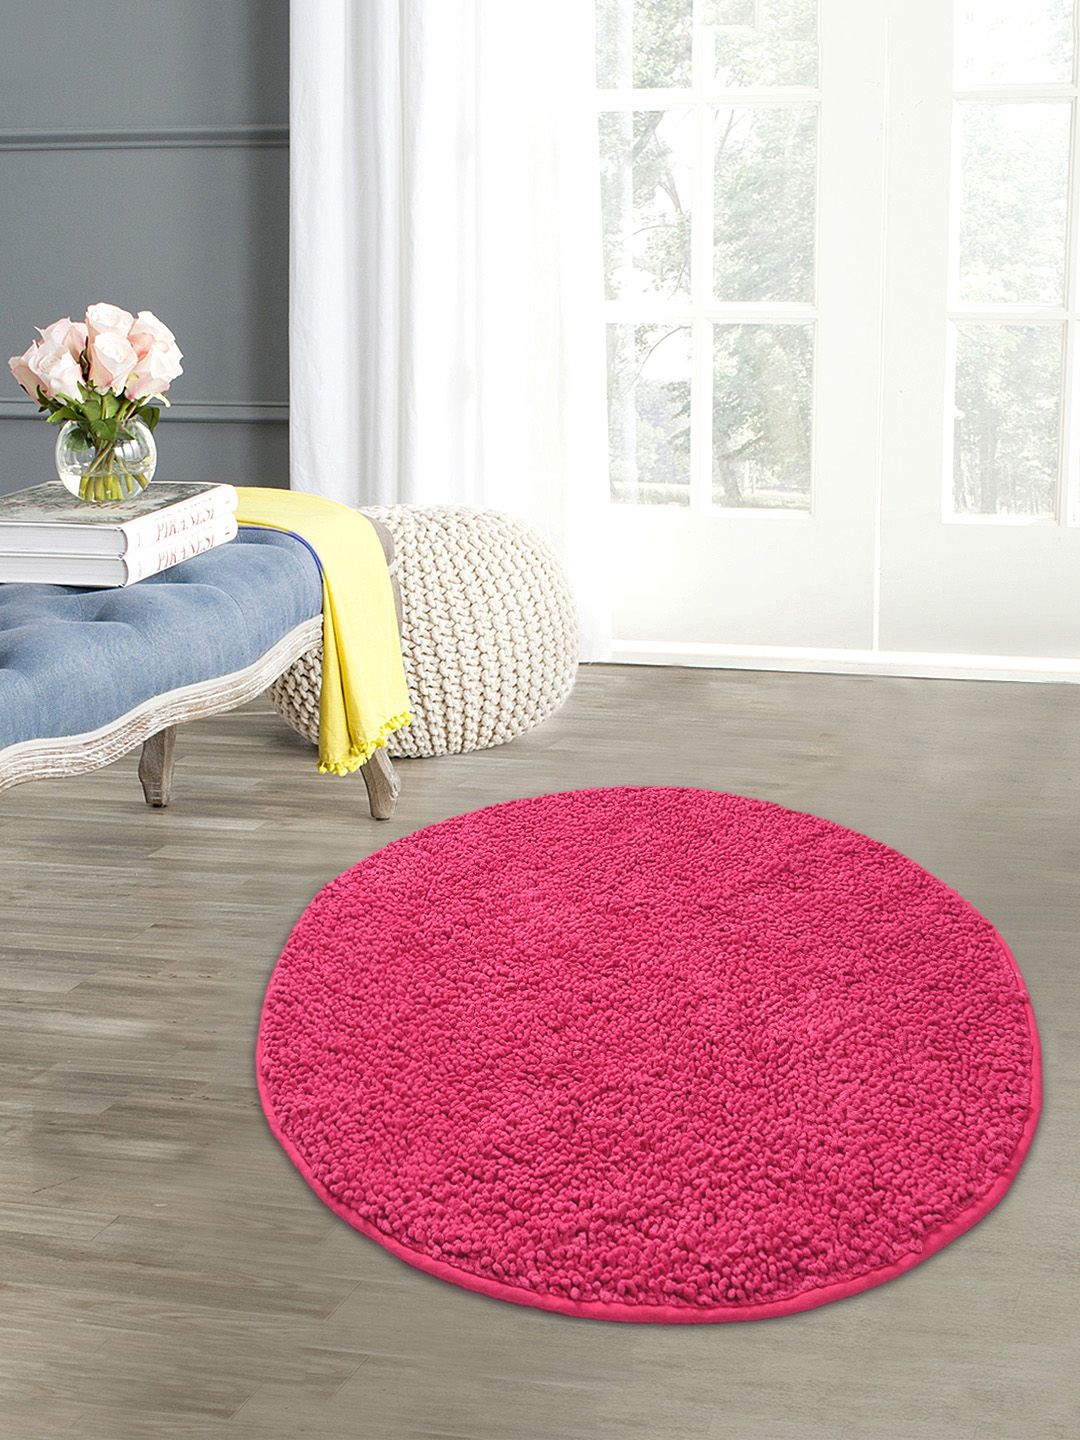 Saral Home Pink Solid Shaggy Mat Price in India